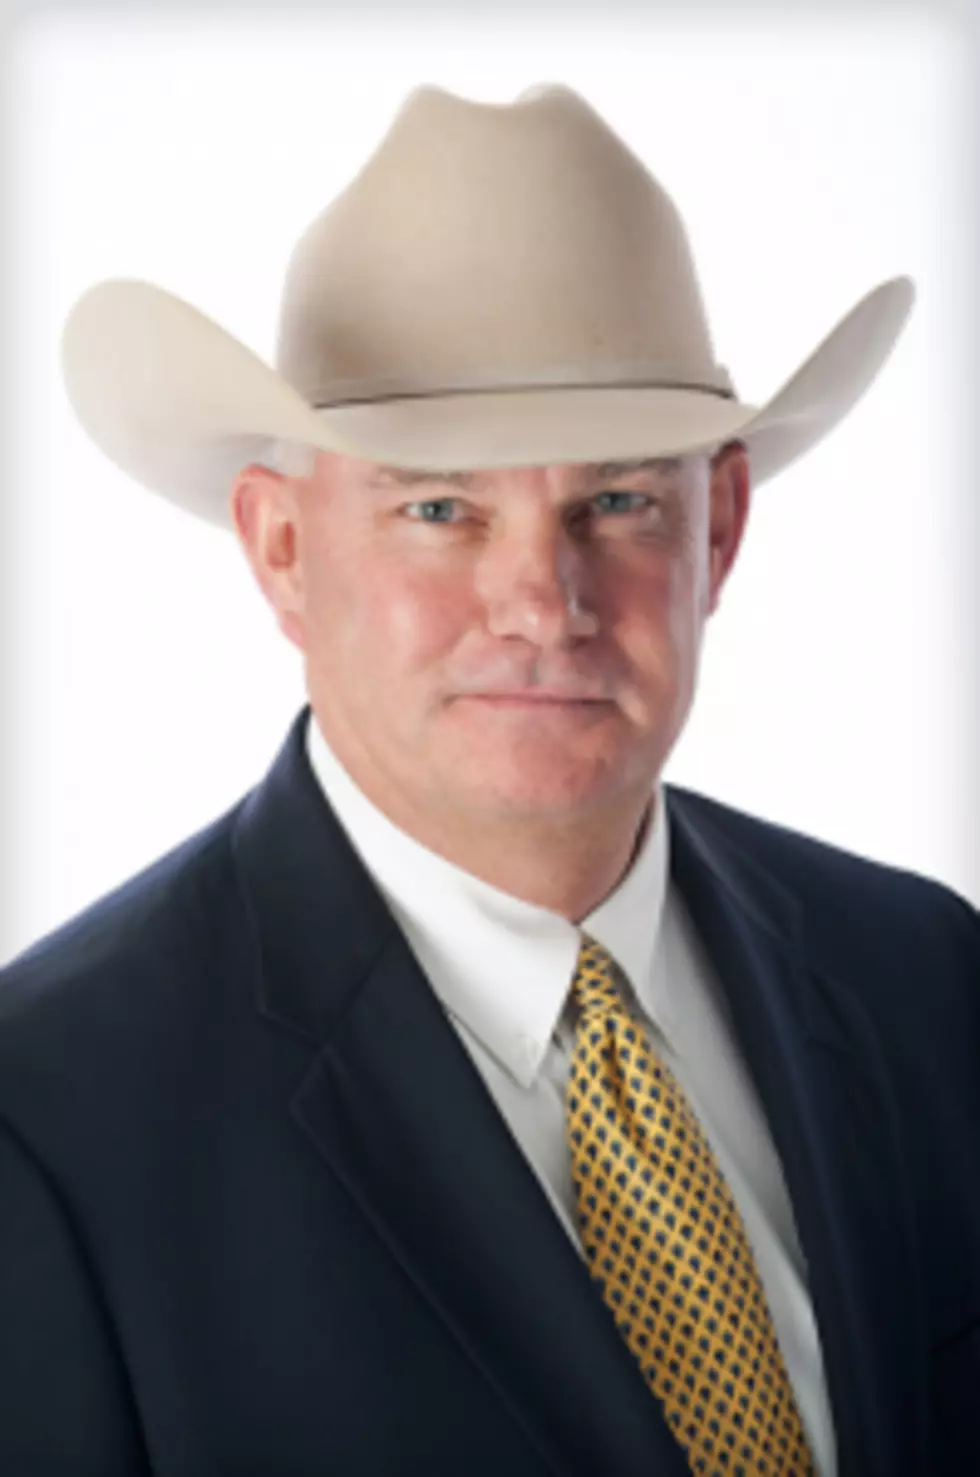 Former Lubbock County Sheriff Endorses Paul Scarborough in Special Election for Hockley County Sheriff